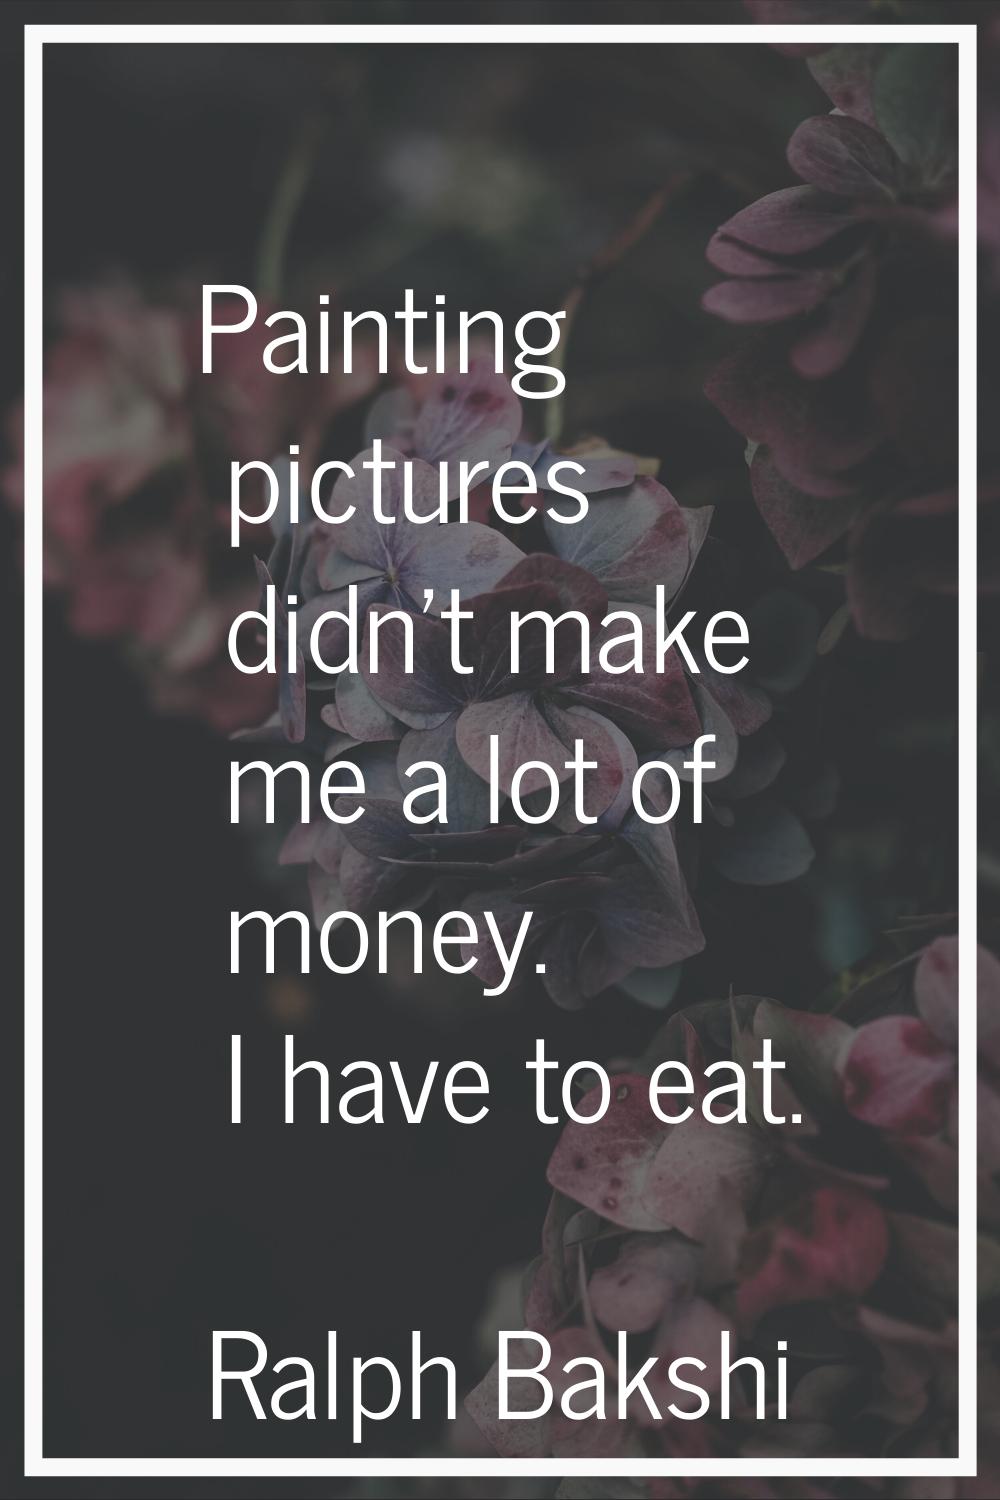 Painting pictures didn't make me a lot of money. I have to eat.